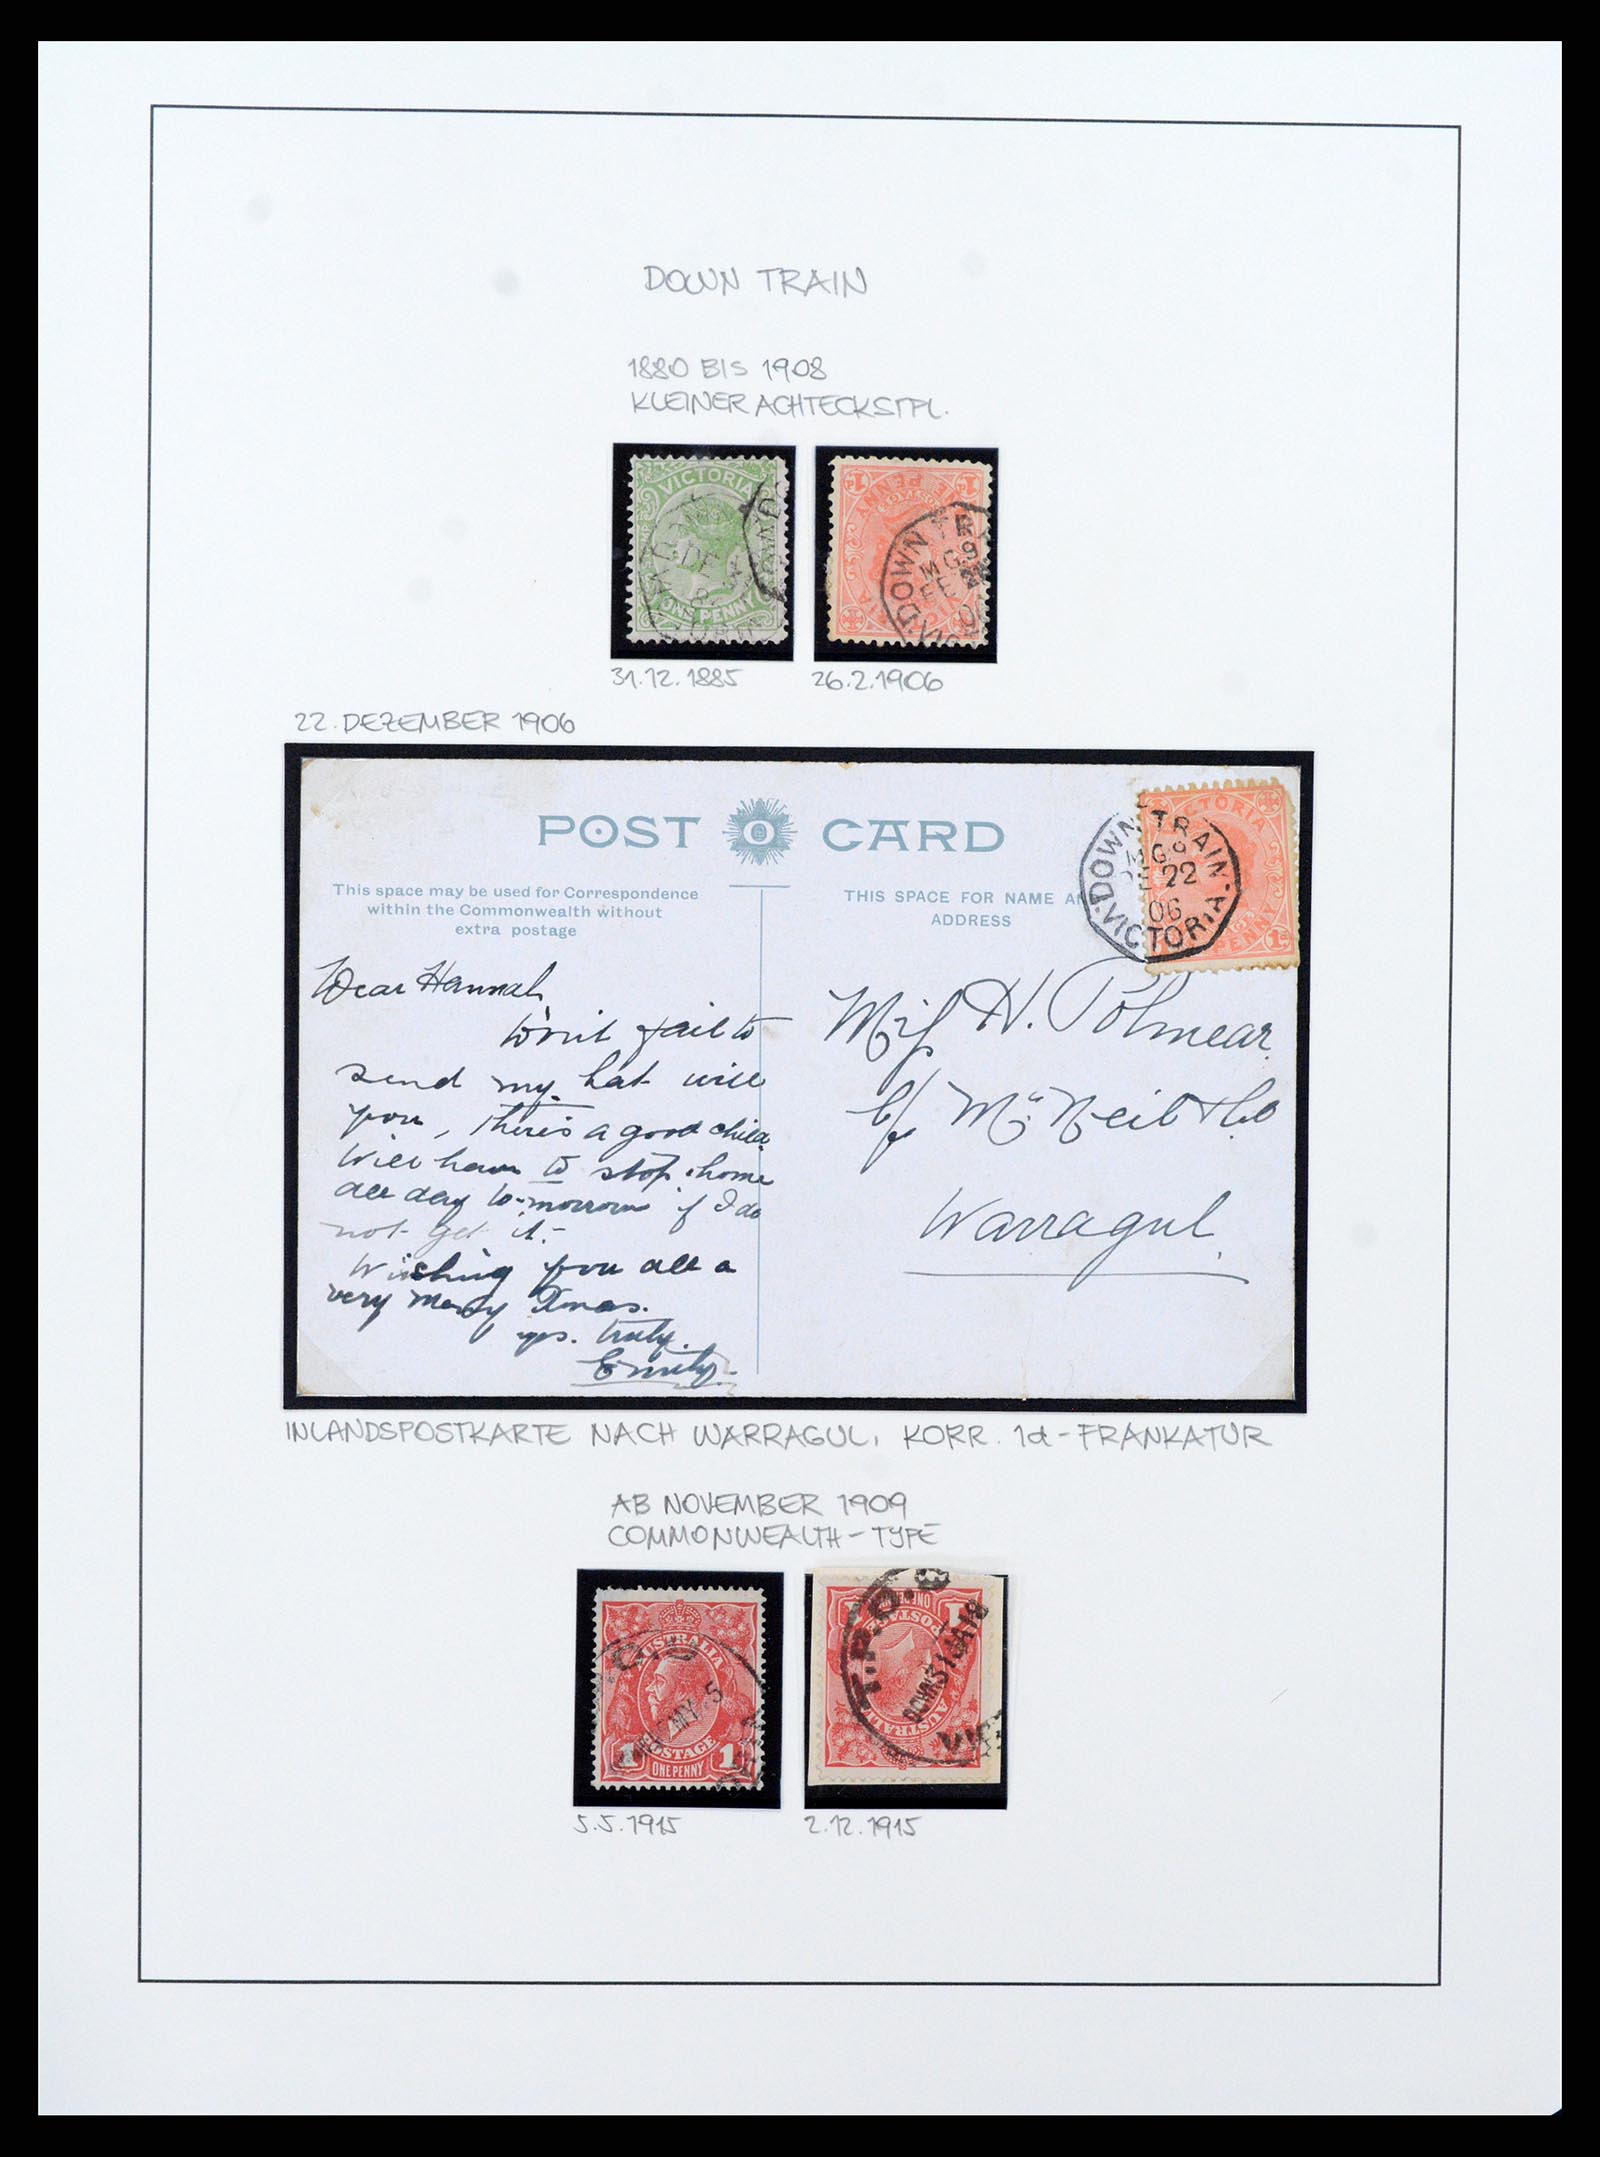 37514 016 - Stamp collection 37514 Victoria tpo cancellations 1865-1930.